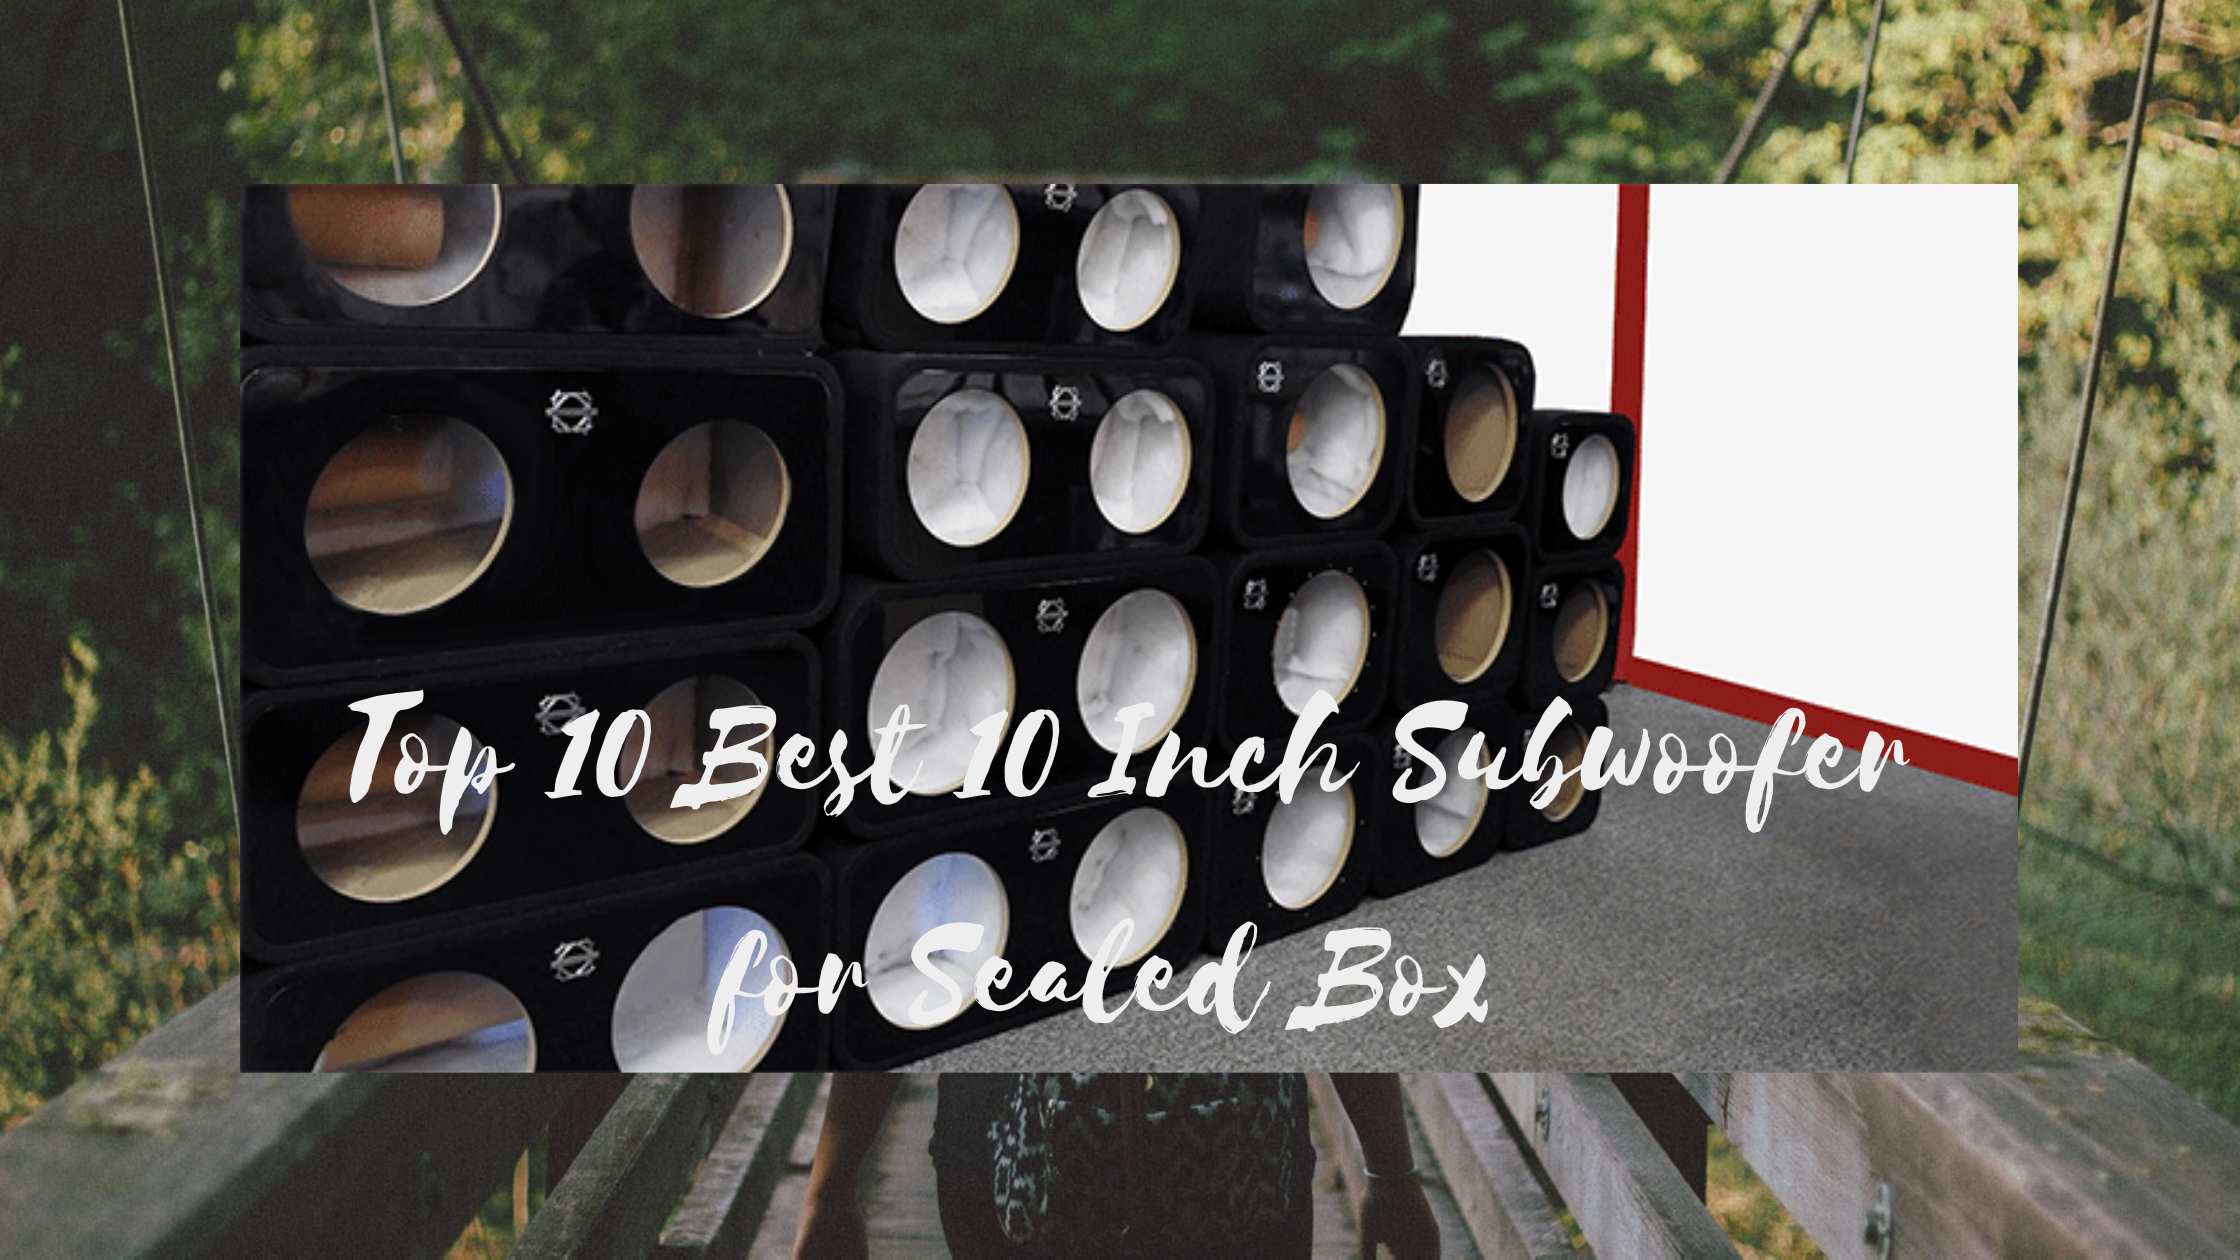 Best 10 Inch Subwoofer for Sealed Box